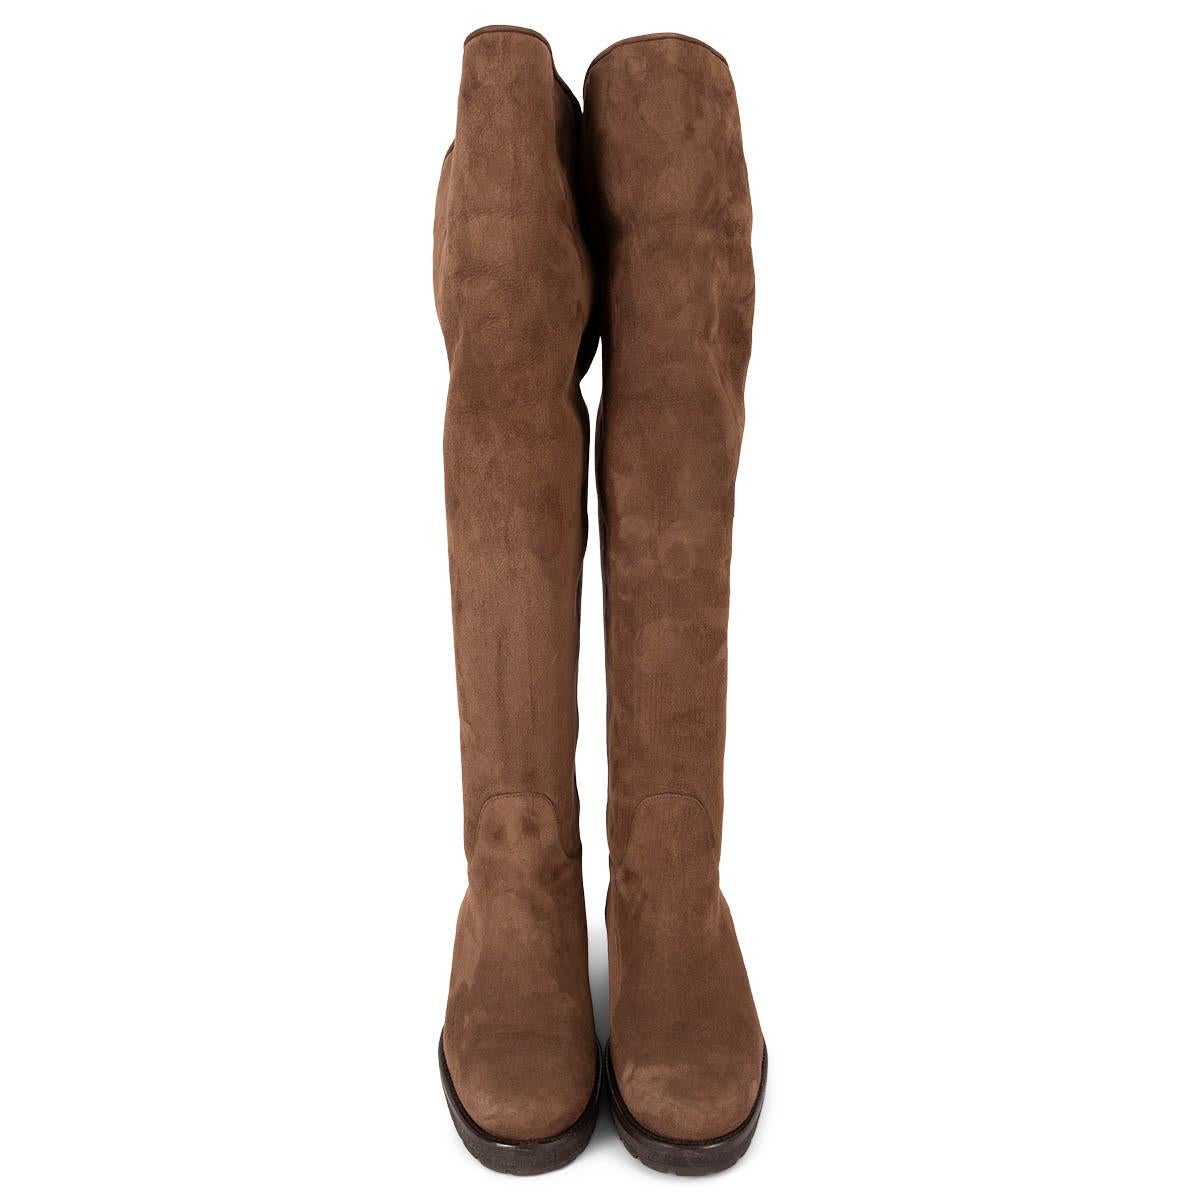 100% authentic Loro Piana shearling lined over knee boots in brown suede with rubber sole. Have been worn and are in excellent condition. 

Measurements
Imprinted Size	41
Shoe Size	41
Inside Sole	28cm (10.9in)
Width	8cm (3.1in)
Heel	3cm